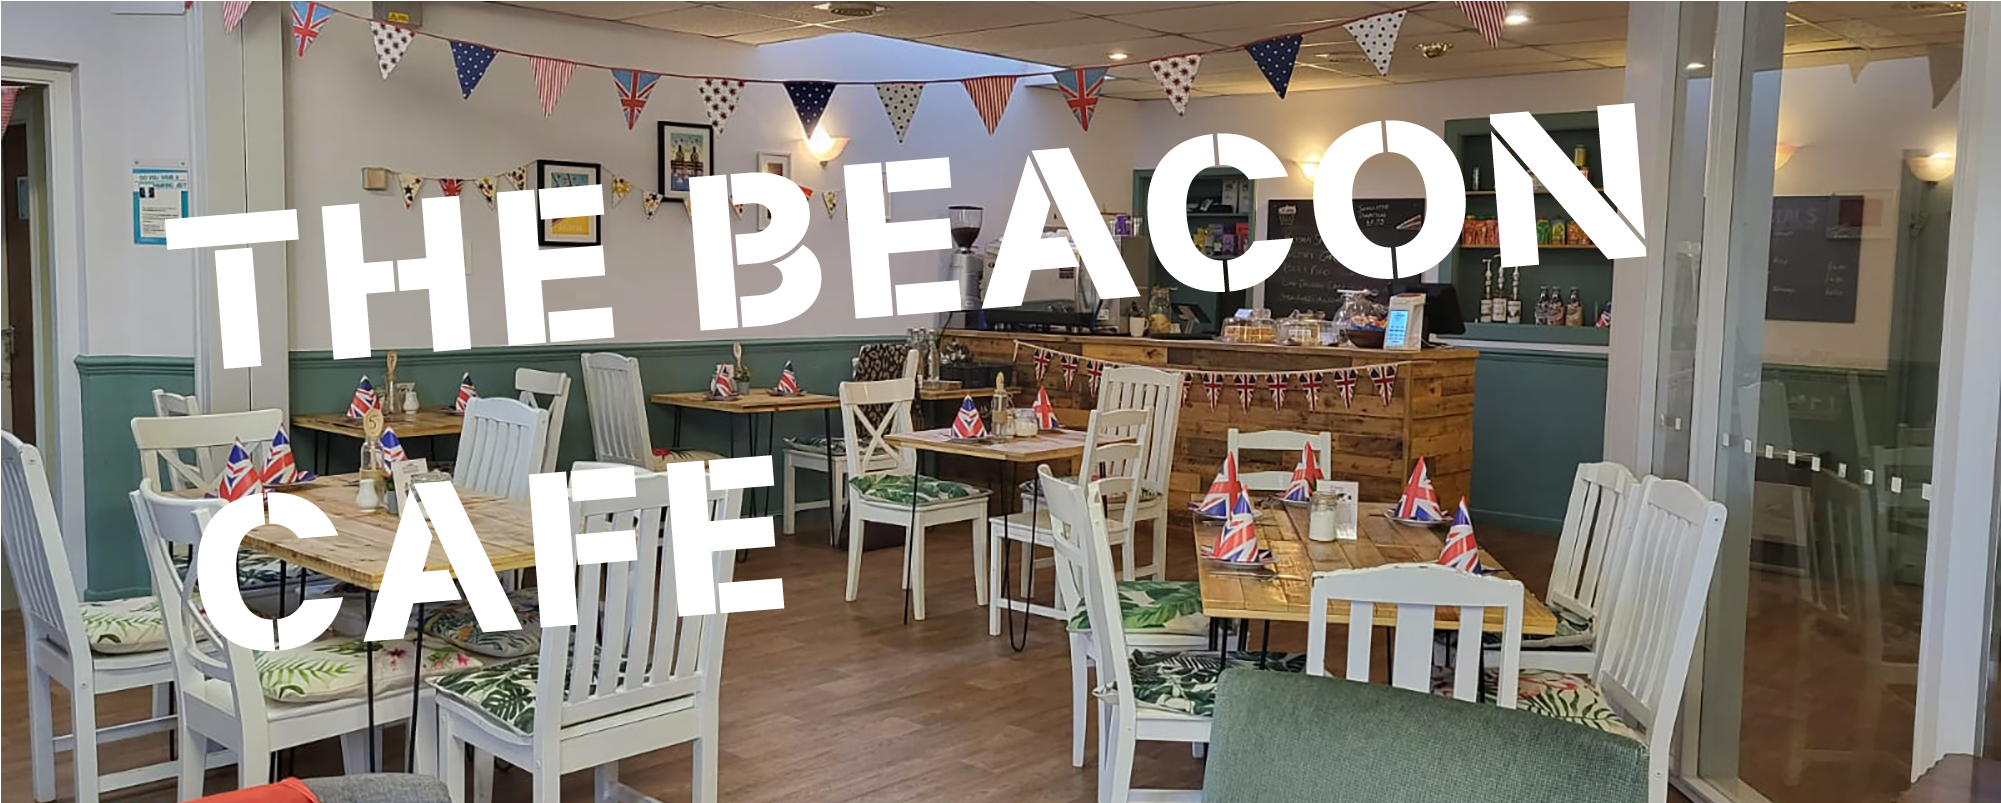 The Beacon Cafe Hero Image with wording